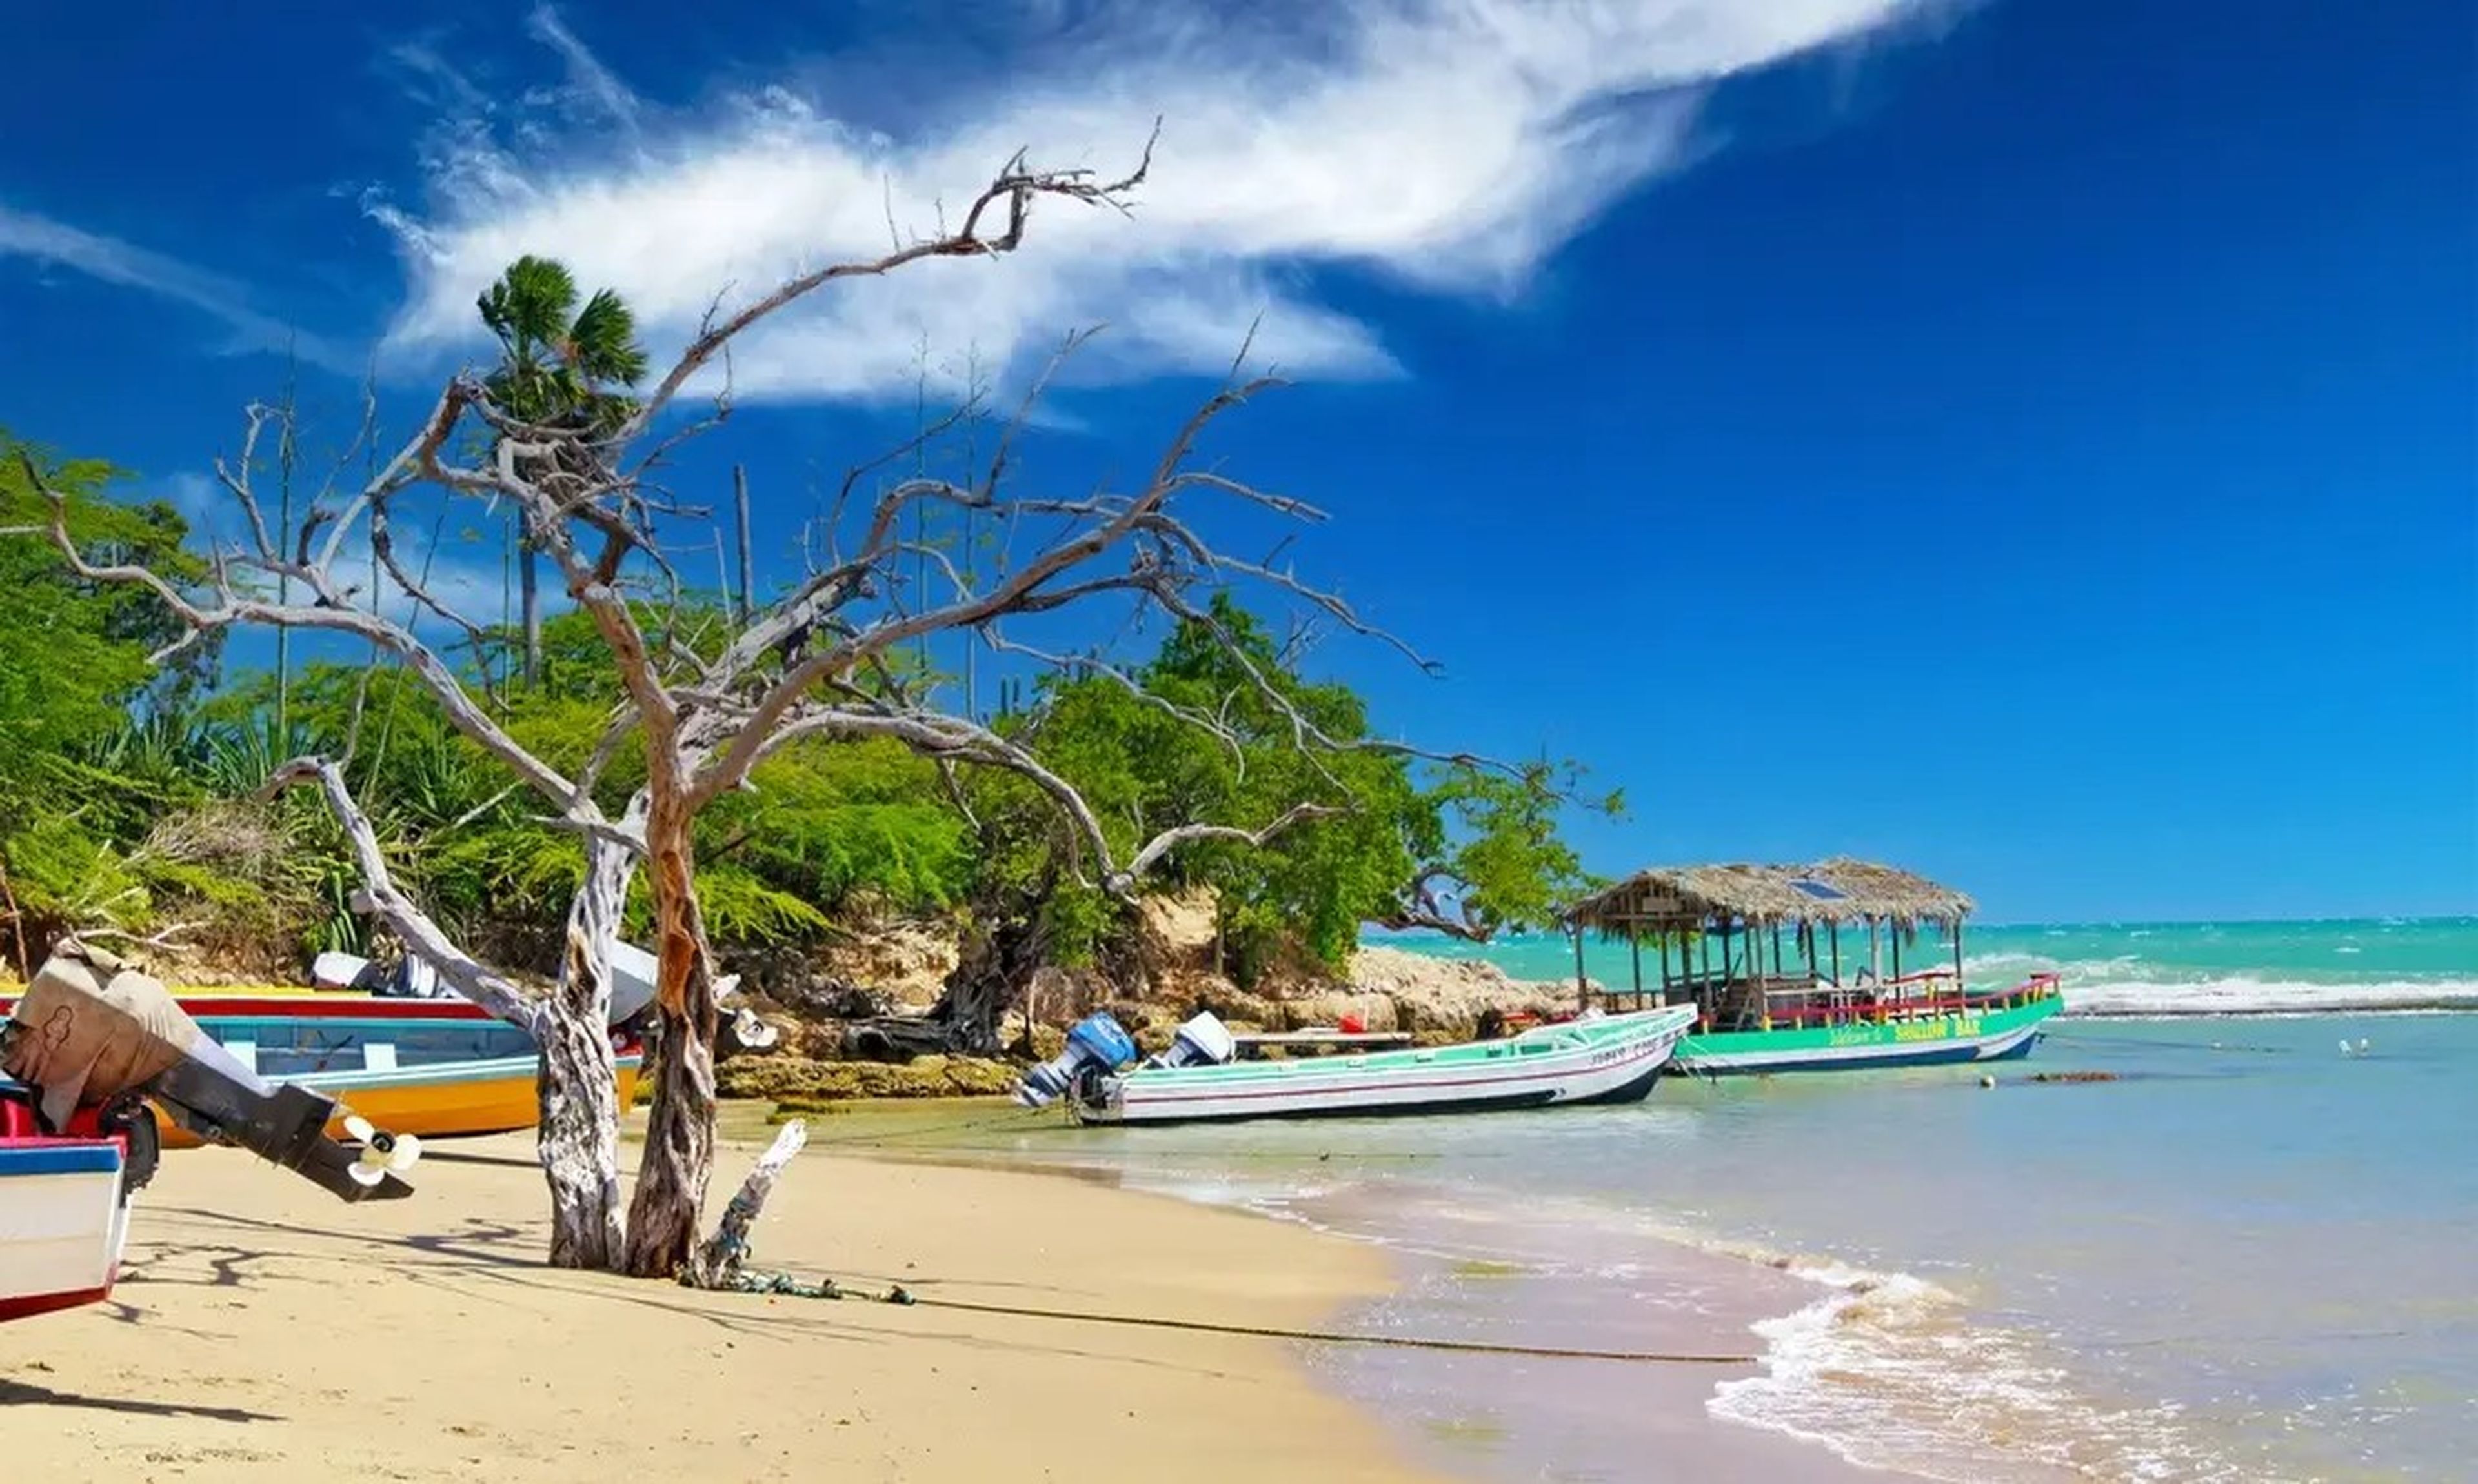 Tree in the sands of Treasure Beach, Jamaica with colorful boats nearby